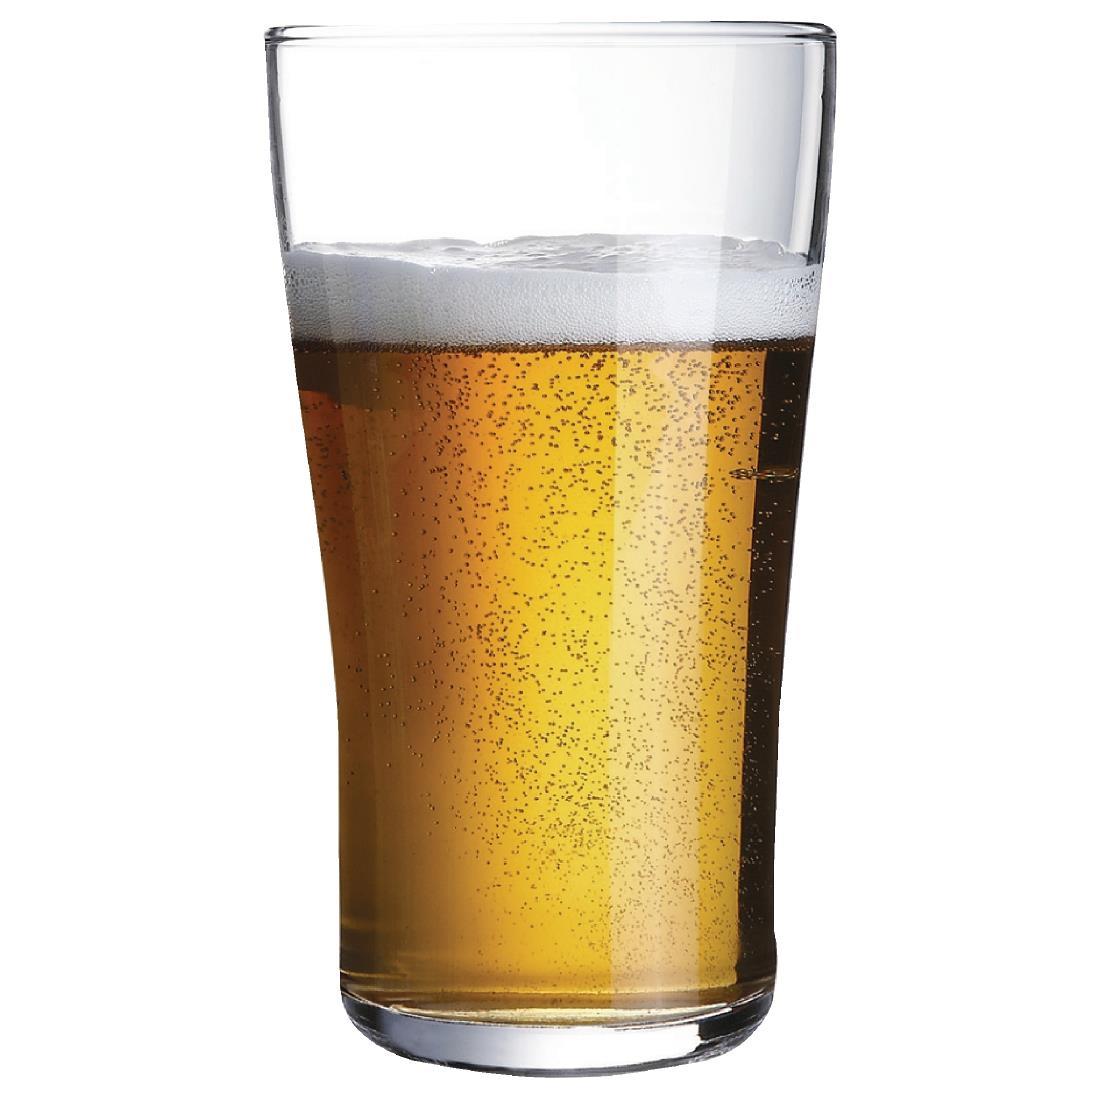 Arcoroc Ultimate Nucleated Beer Glasses 570ml CE Marked (Pack of 36) - GC540  - 3